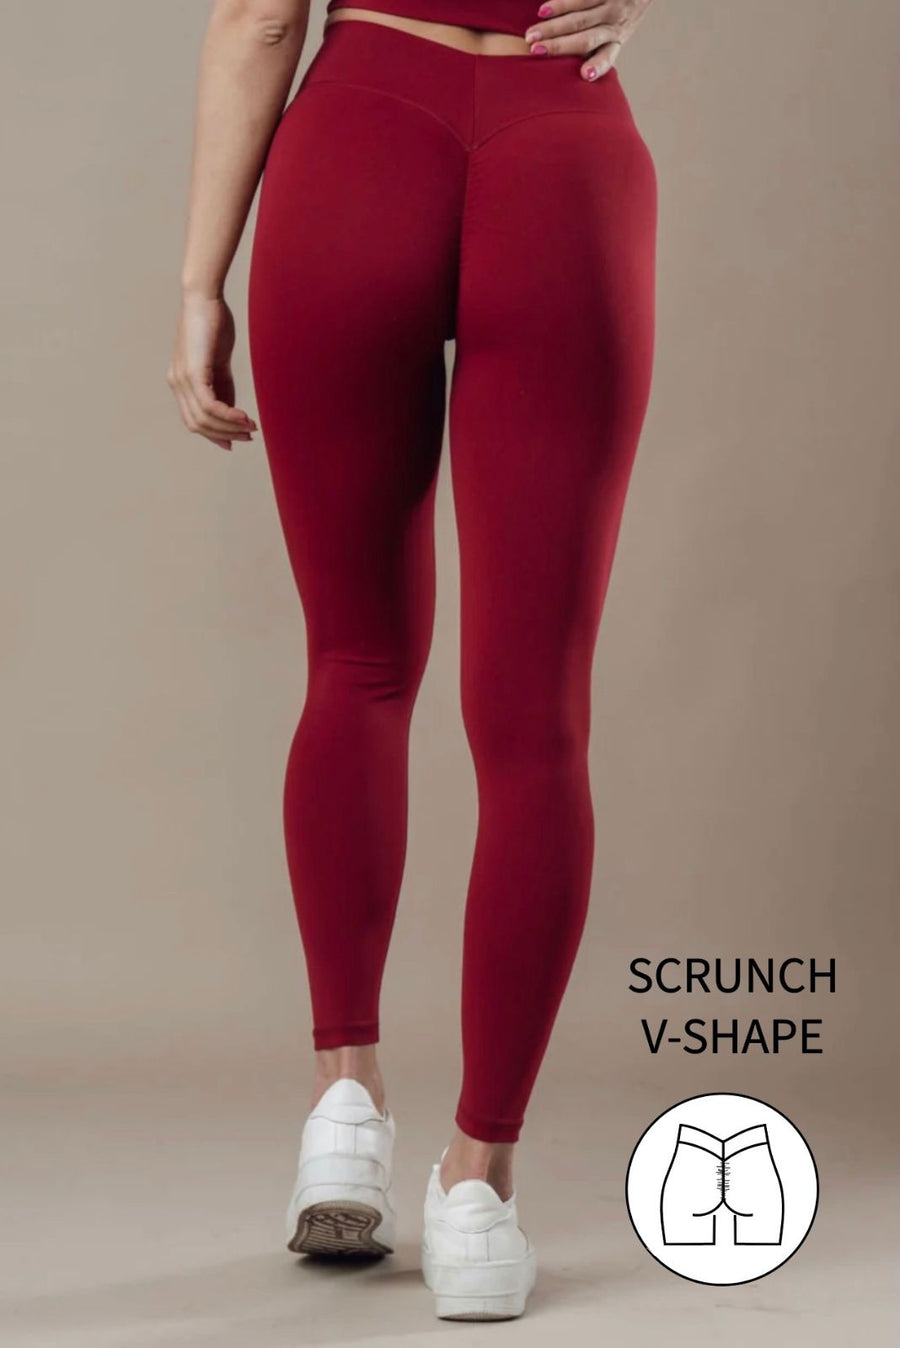 Savvy brand new savvi muscle leggings Red - $18 (71% Off Retail